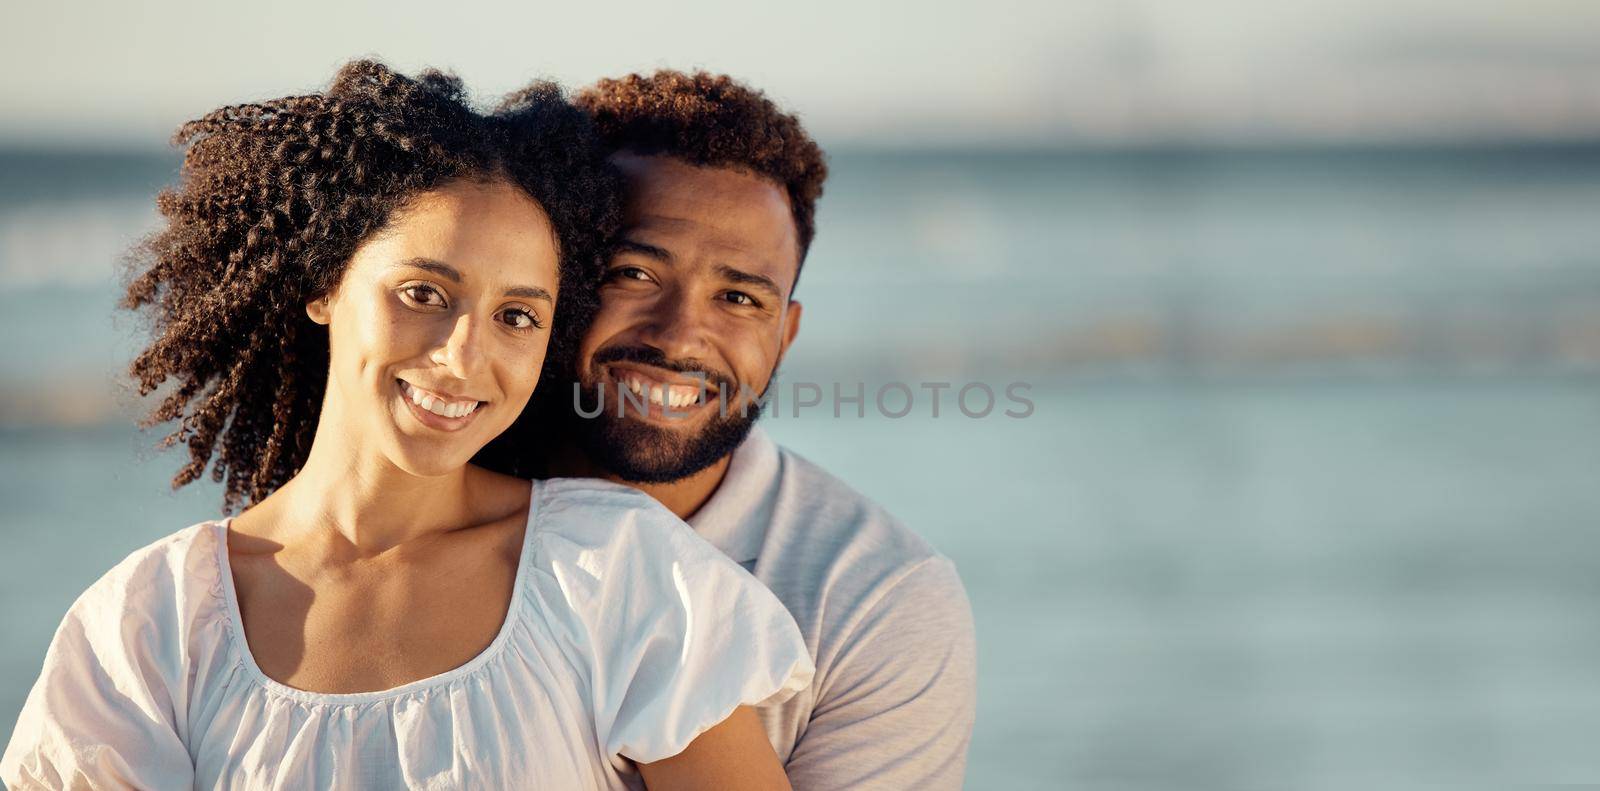 Closeup portrait of an young affectionate mixed race couple standing on the beach and smiling during sunset outdoors. Hispanic couple showing love and affection on a romantic date at the beach.